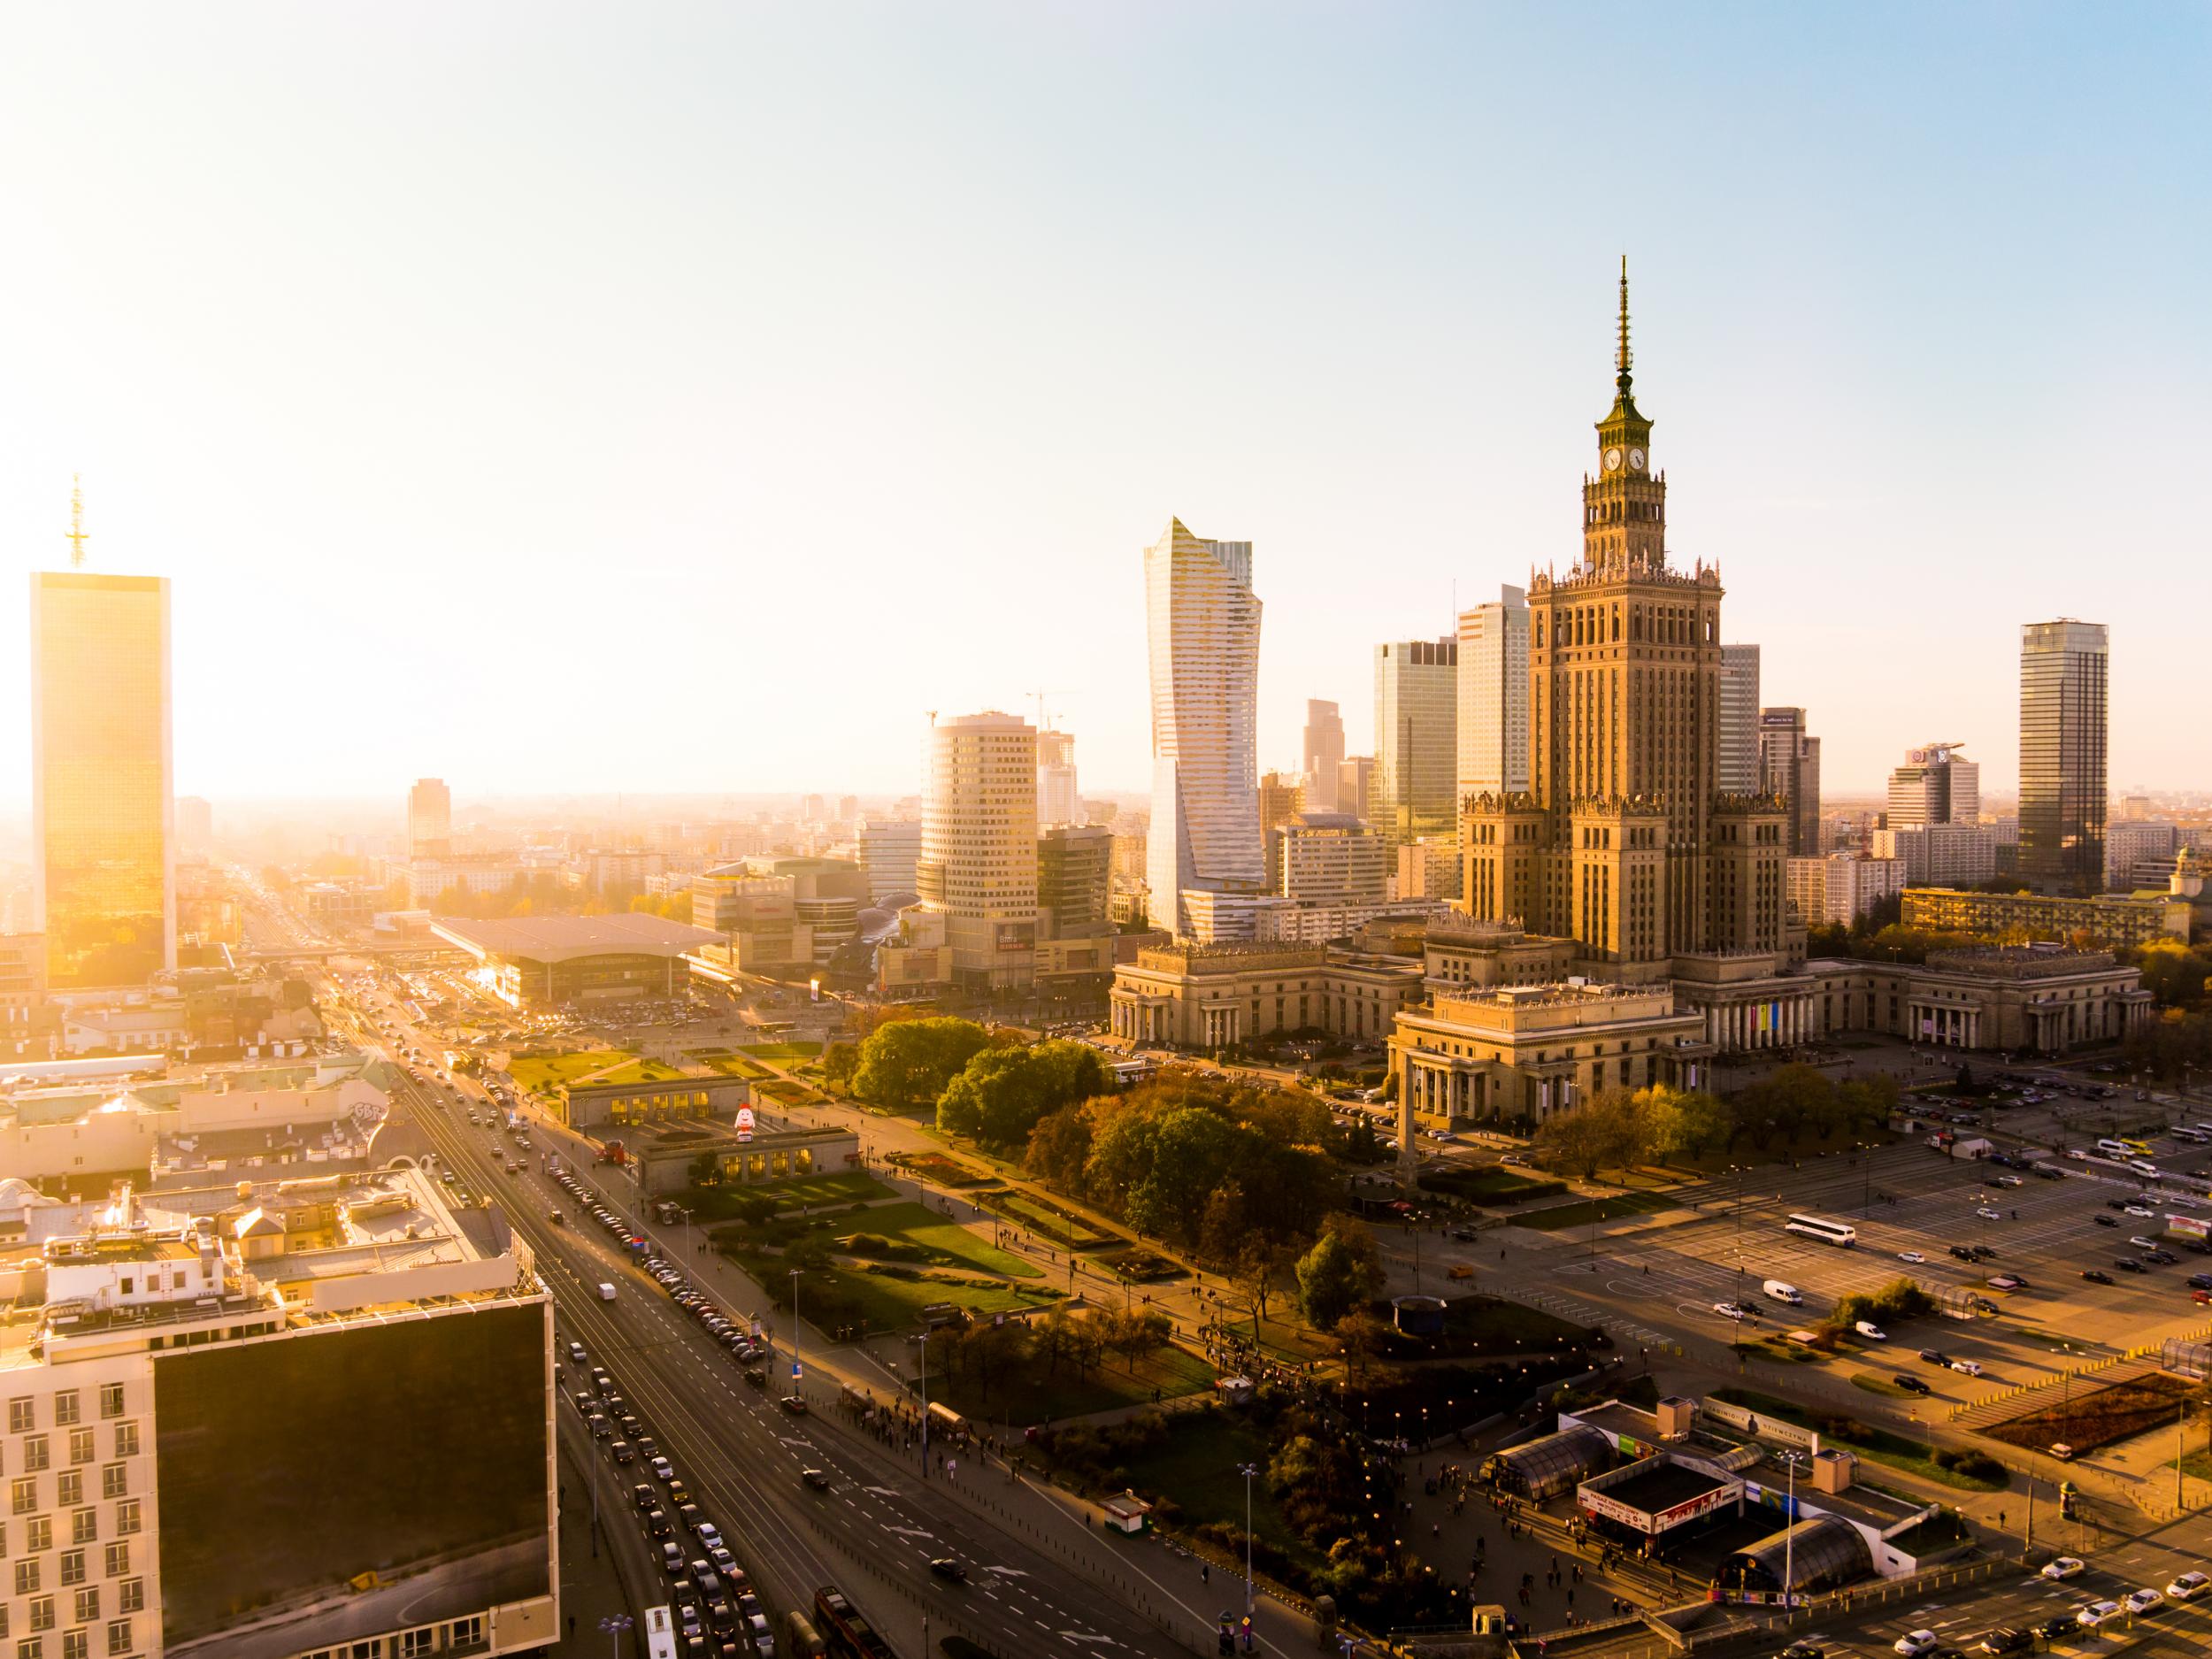 Warsaw is full of things to eat and places to see, such as the Palace of Culture and Science – Poland’s tallest building